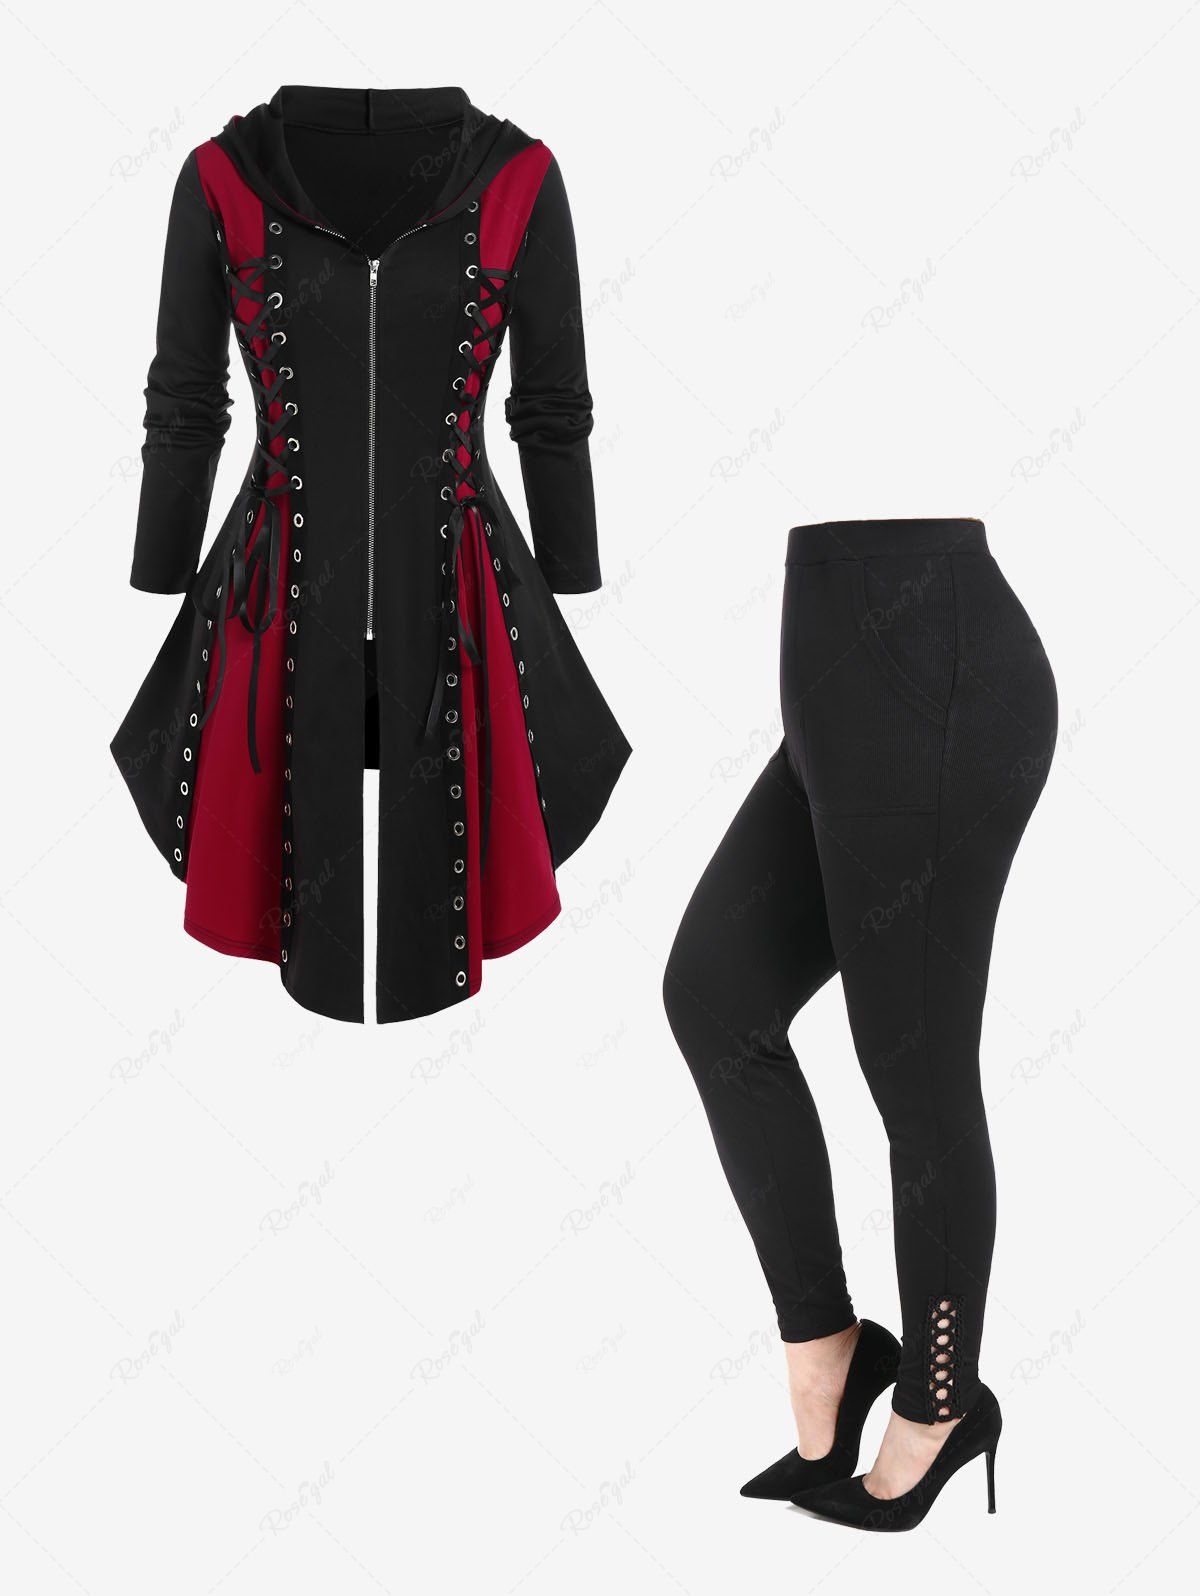 Shops Plus Size Hooded Lace Up Grommets Gothic Coat and Guipure Lace Detail Leggings Outfits  